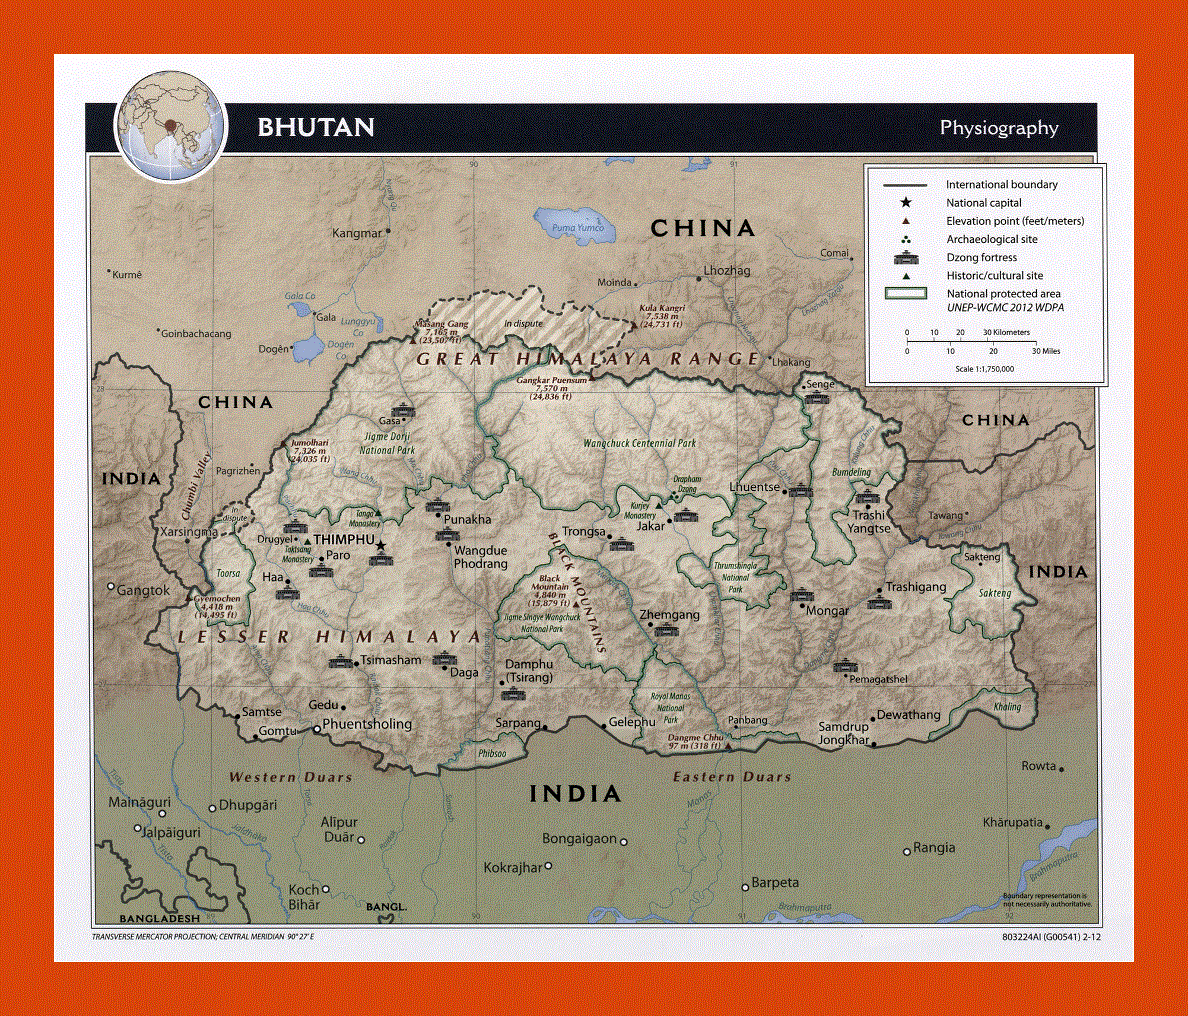 Physiography map of Bhutan - 2012